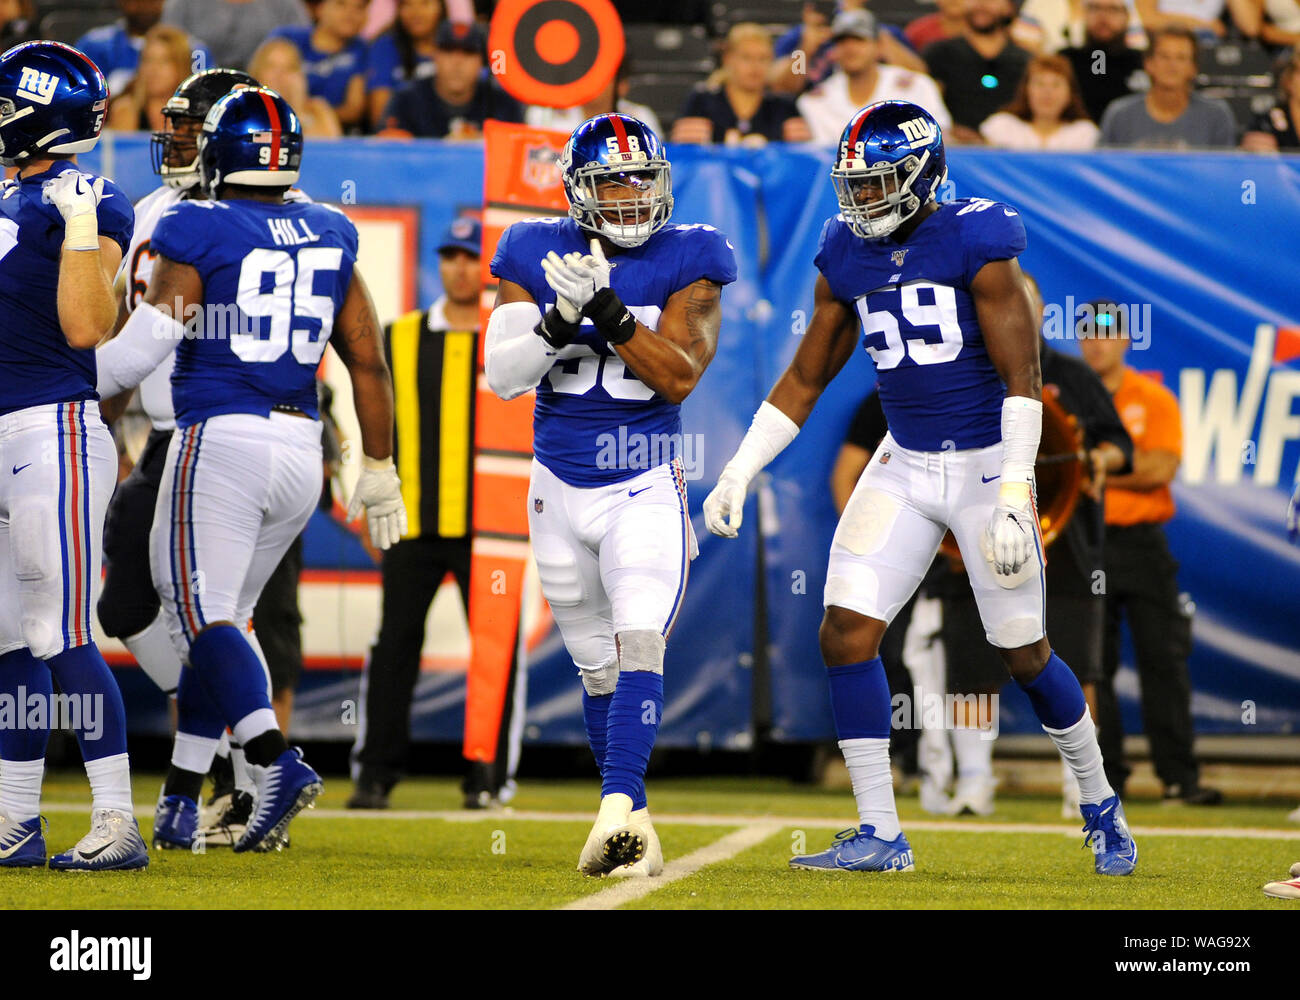 August 16, 2019: August 16, 2019 : New York Giants Linebacker TAE DAVIS (58) celebrates a big hit during the game against the Chicago Bears. The game took place at Met Life Stadium, East Rutherford, NJ. (Credit Image: © Bennett CohenZUMA Wire) Stock Photo